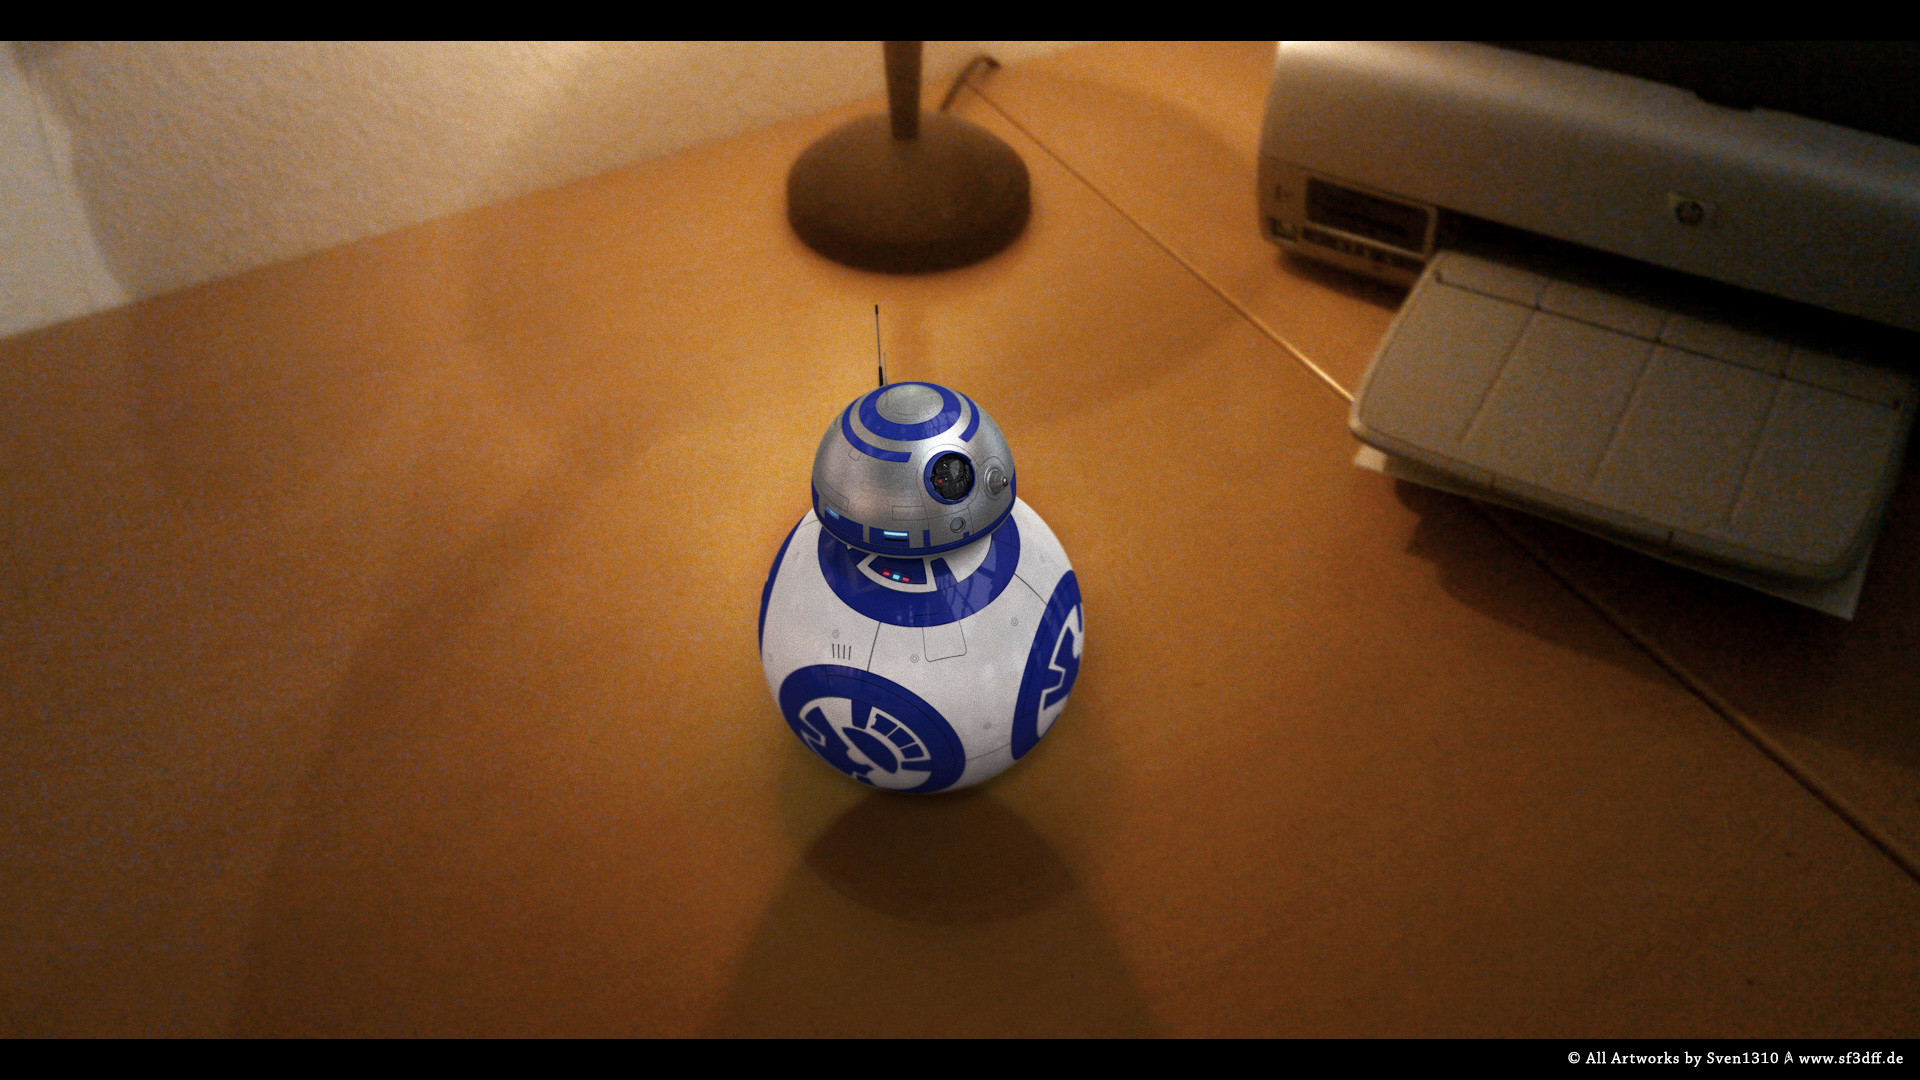 1920x1080 ... BB8 Pic08 - R2D2 Edition by Sven1310